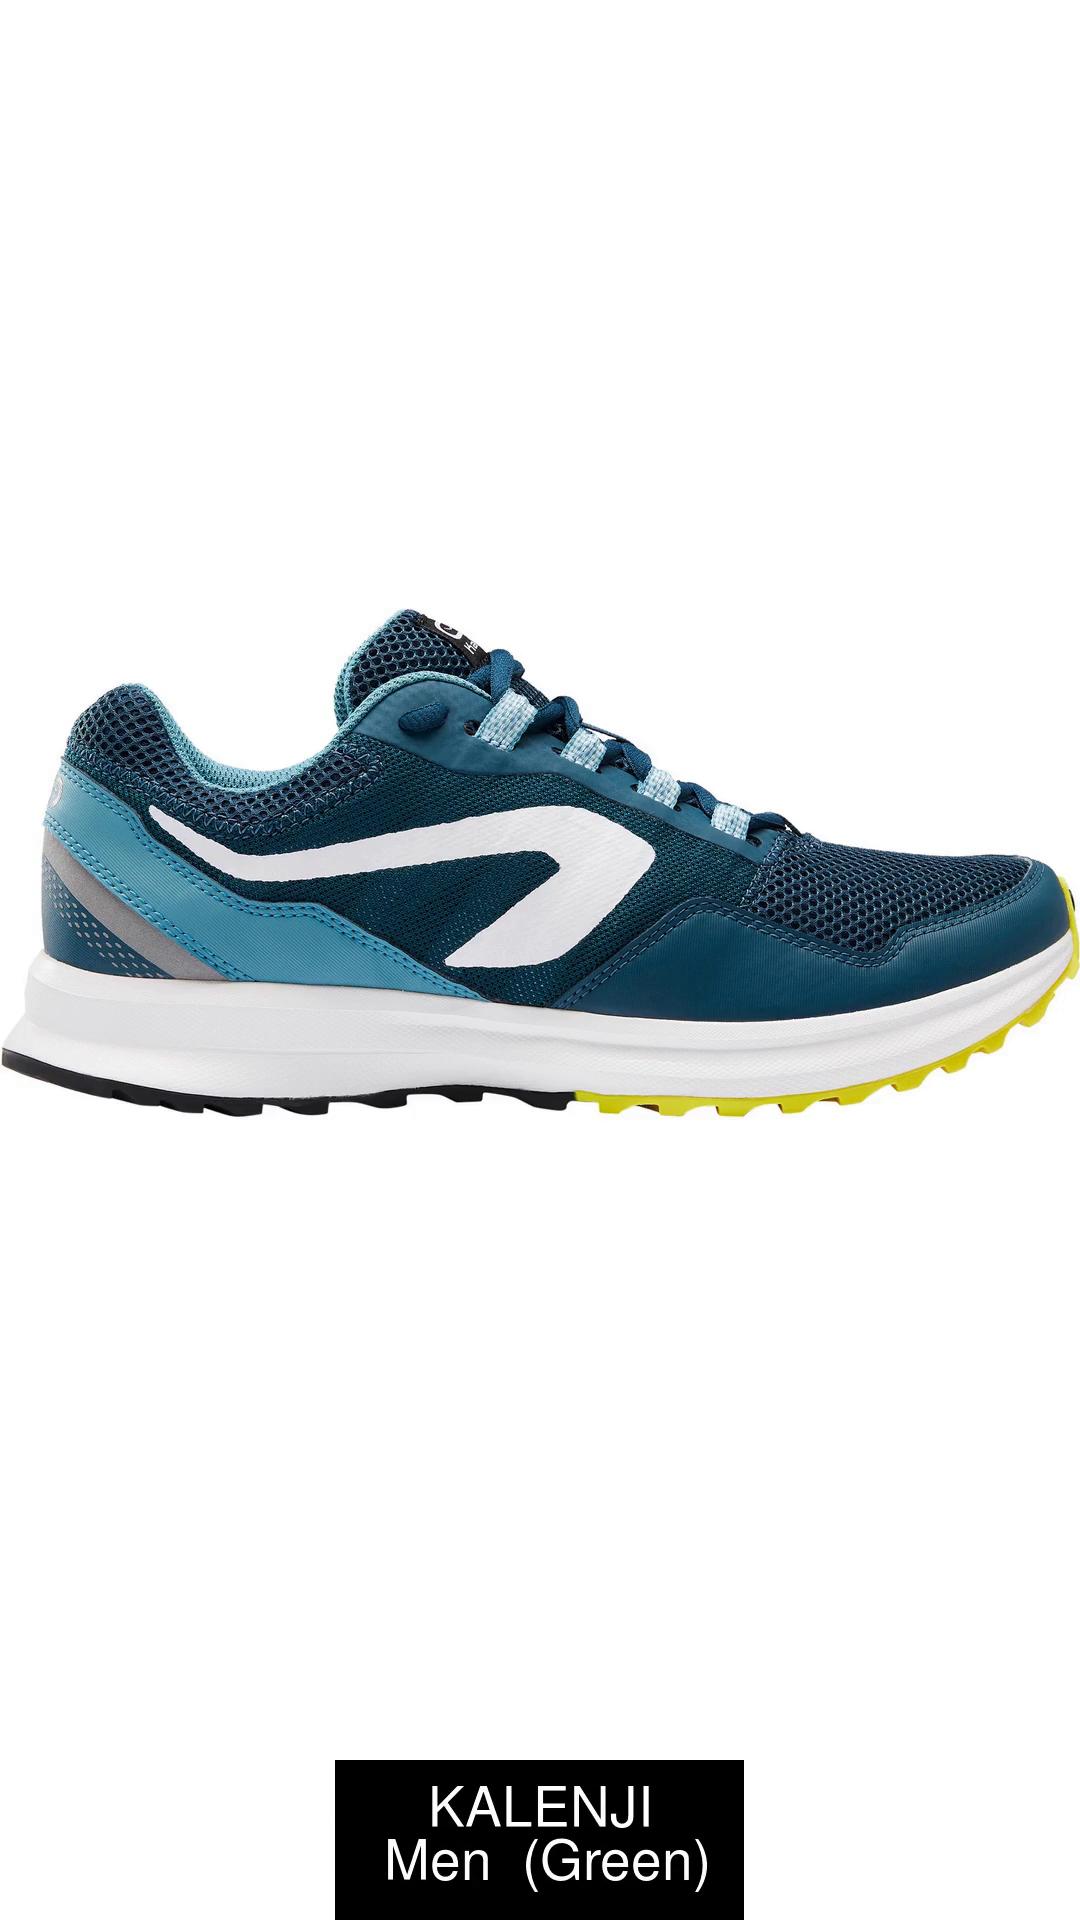 KALENJI by Decathlon Running Shoes For Men - Buy KALENJI by Decathlon  Running Shoes For Men Online at Best Price - Shop Online for Footwears in  India